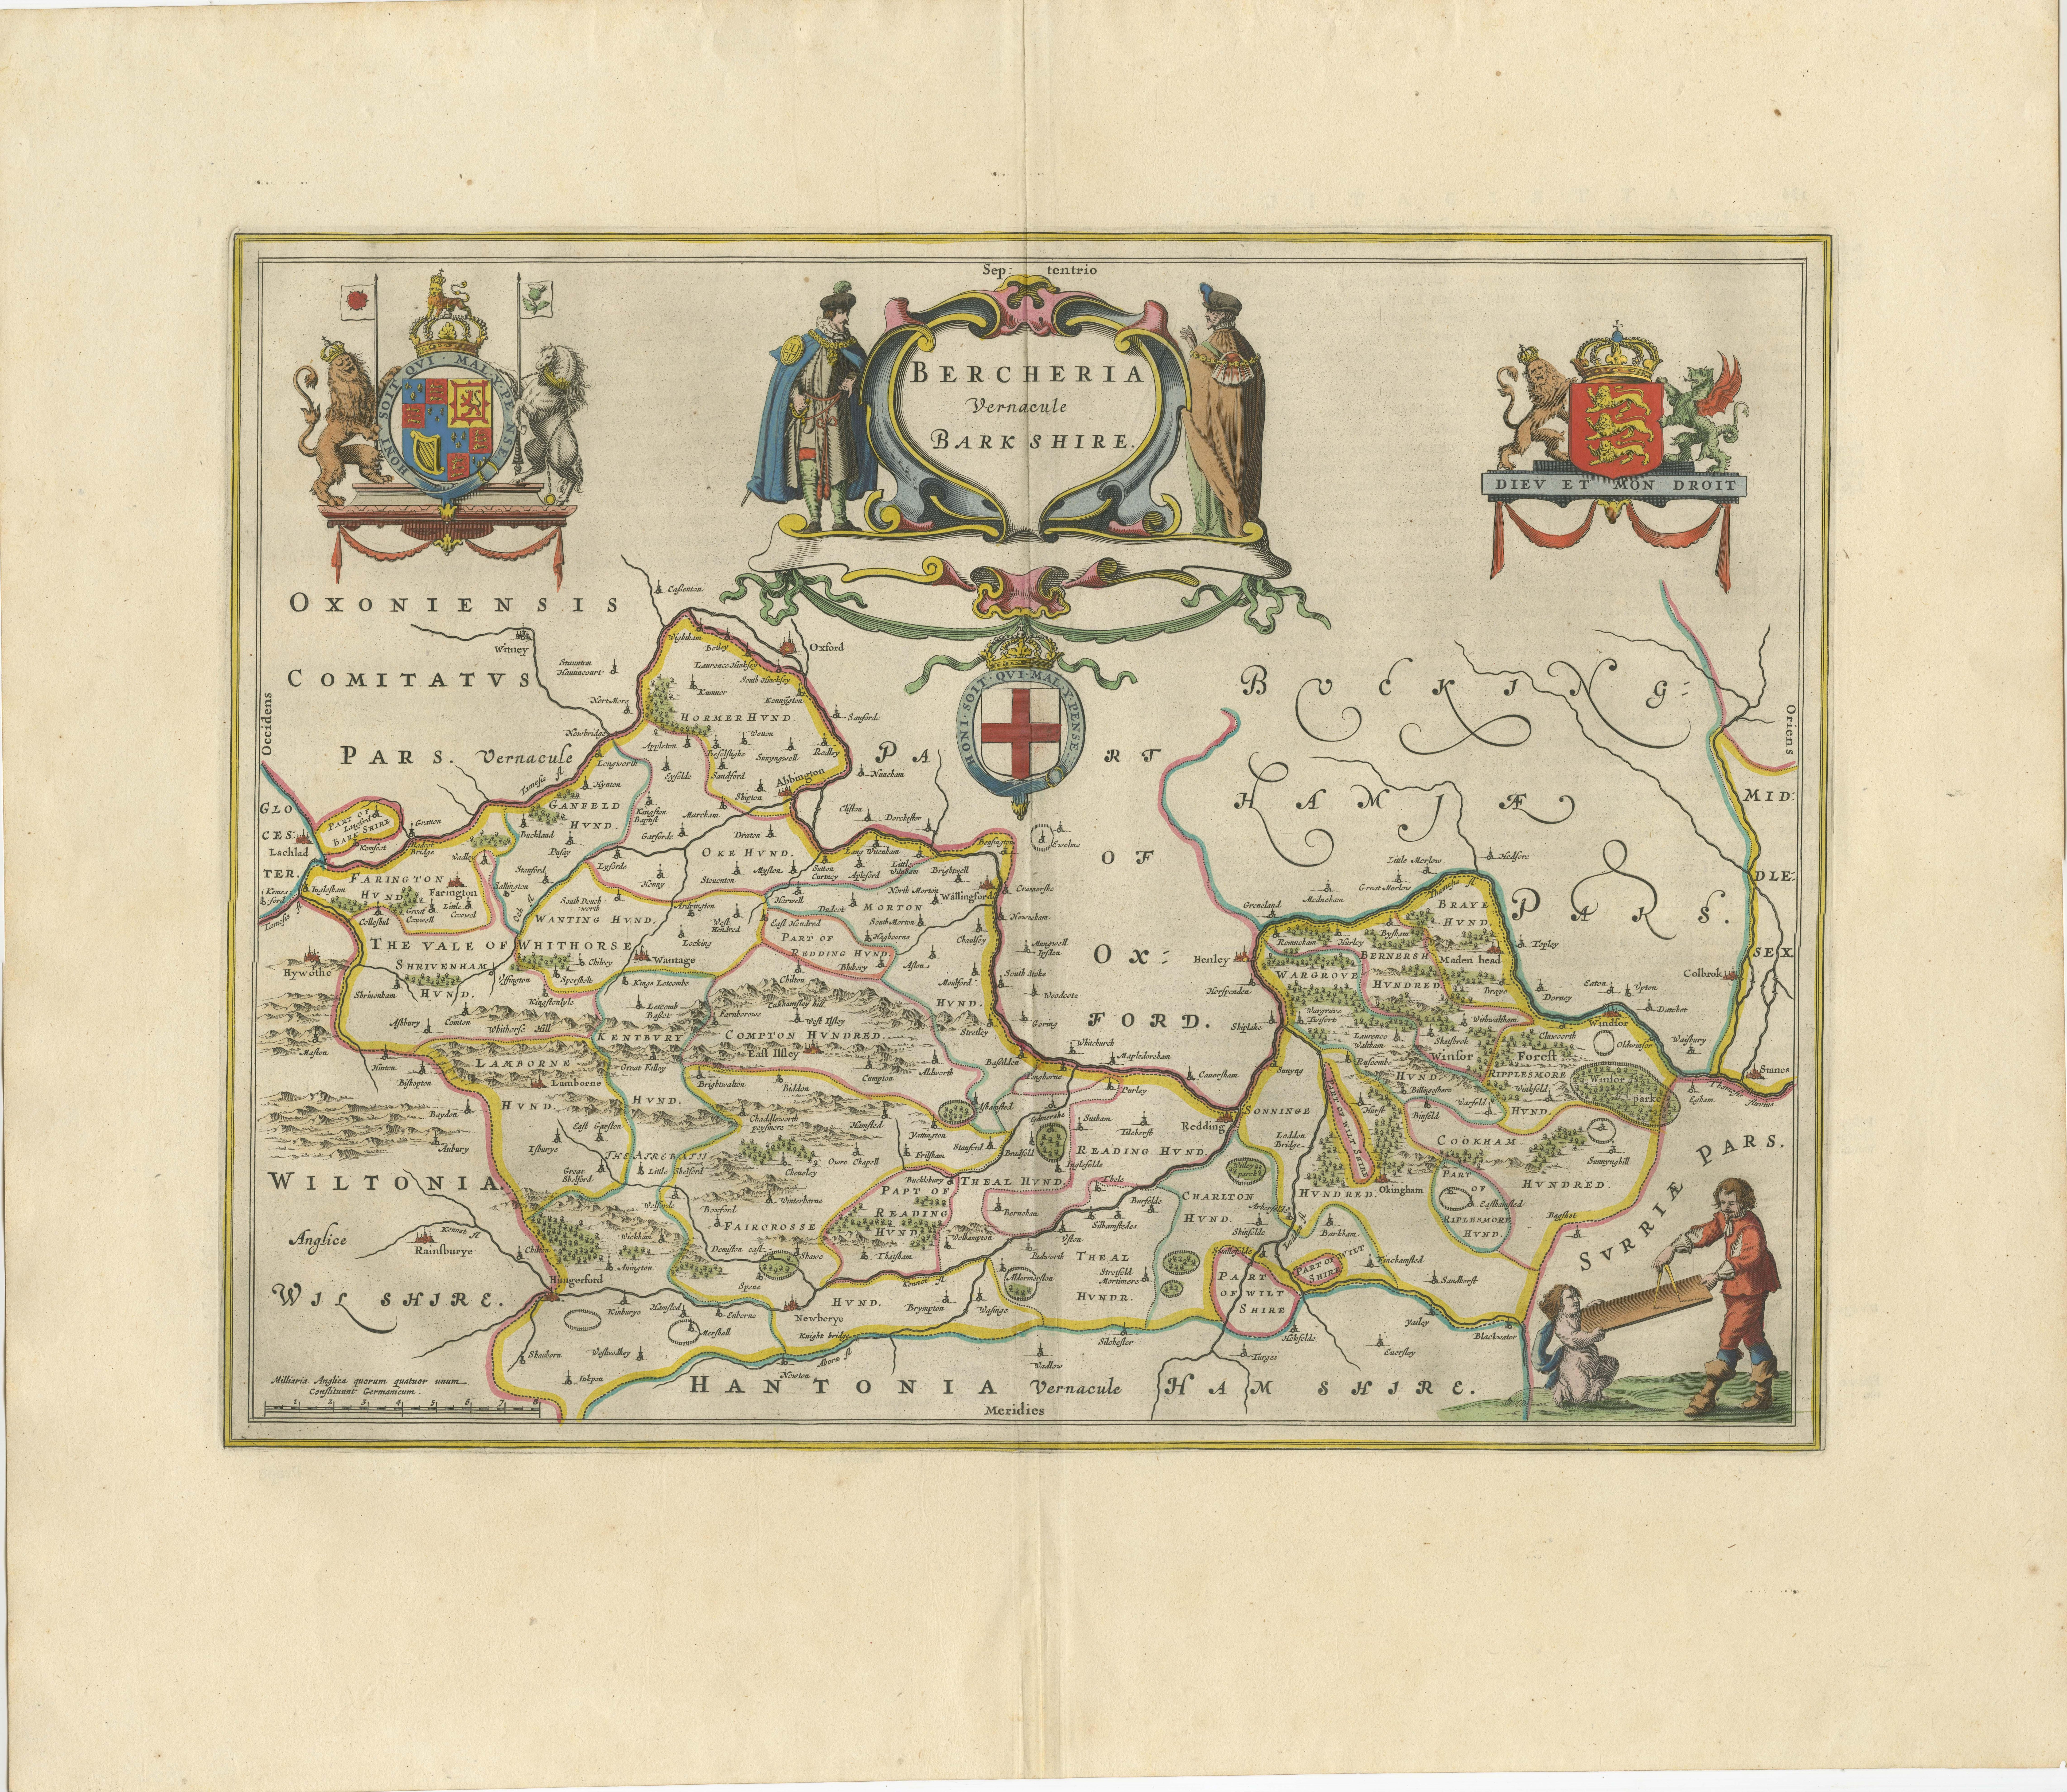 Antique map titled 'Bercheria vernacule Barkshire'. Original old map of Berkshire, a historic county in South East England. Published circa 1665 by J. Blaeu. Willem Jansz. Blaeu and his son Joan Blaeu are the most widely known cartographic